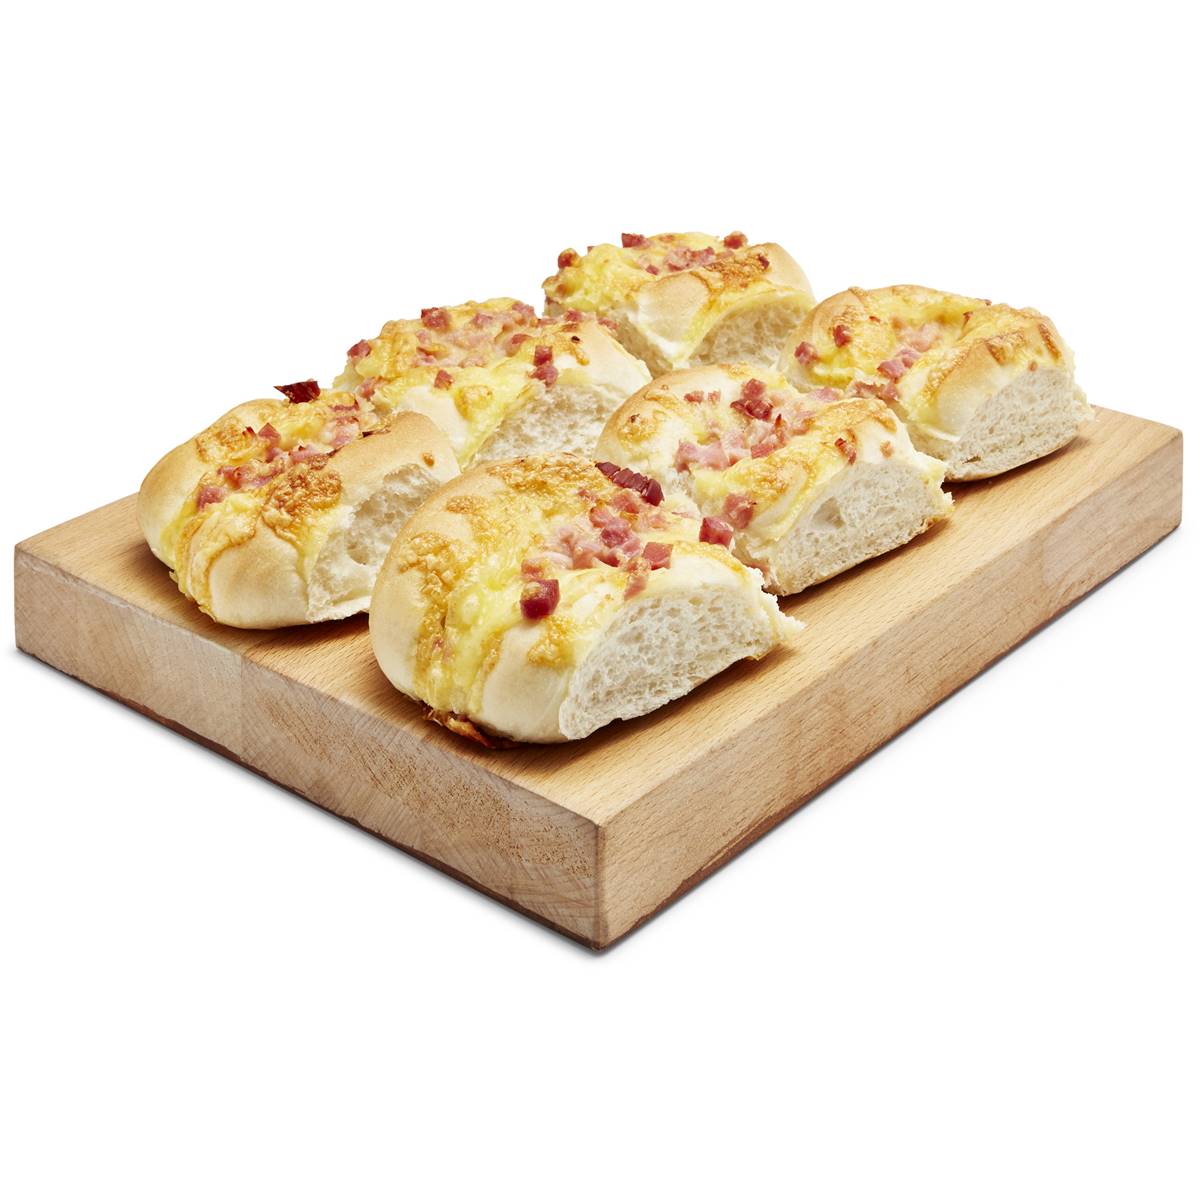 Woolworths Bread Rolls Bacon & Cheese